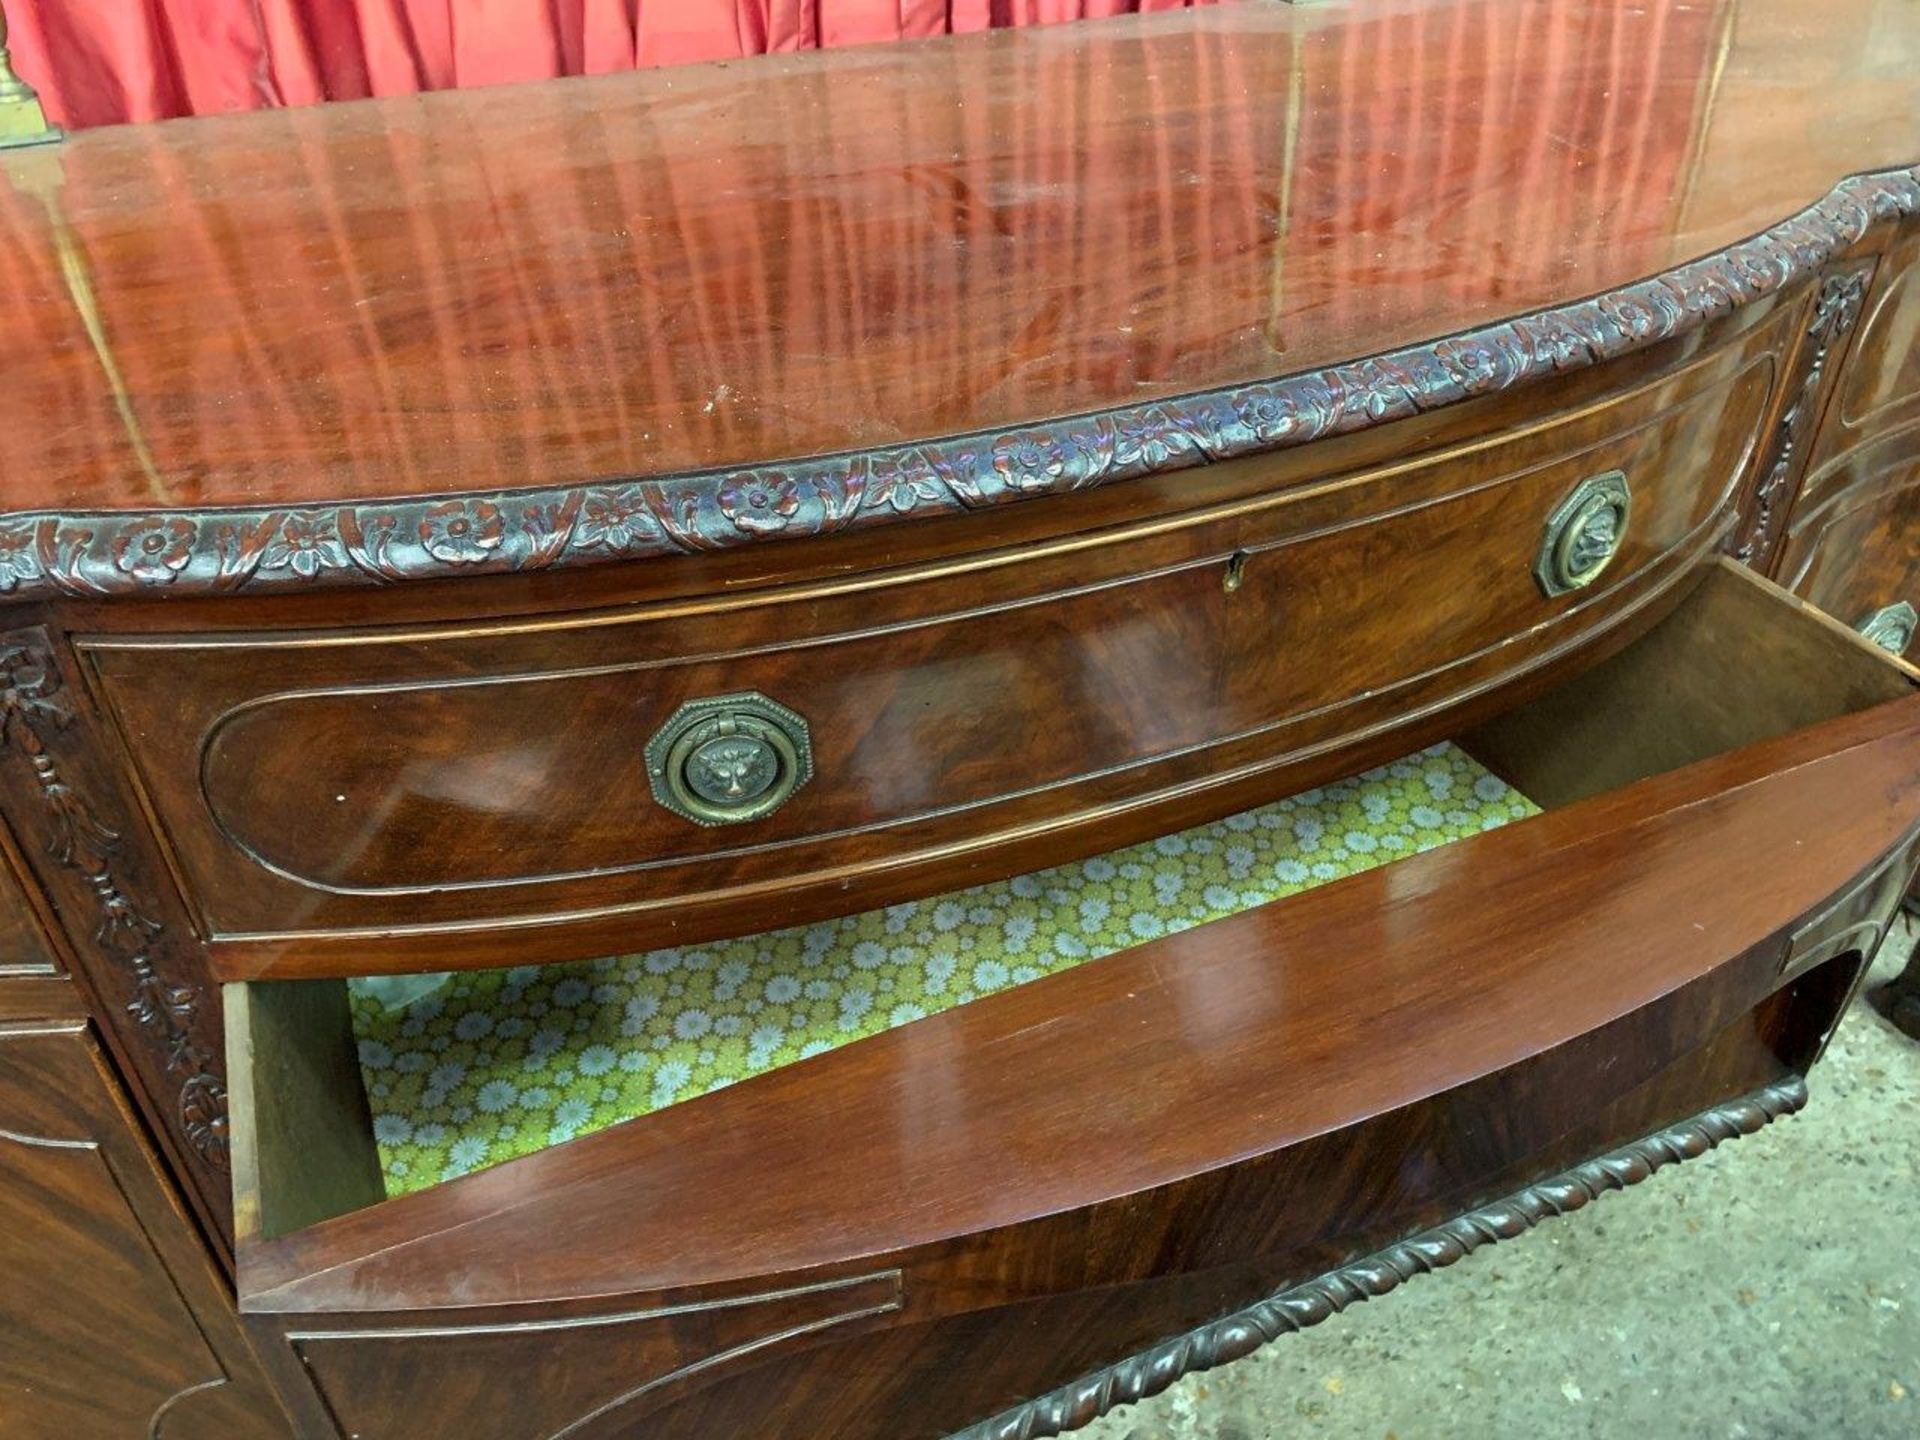 Carved mahogany bow fronted Victorian sideboard - Image 2 of 7